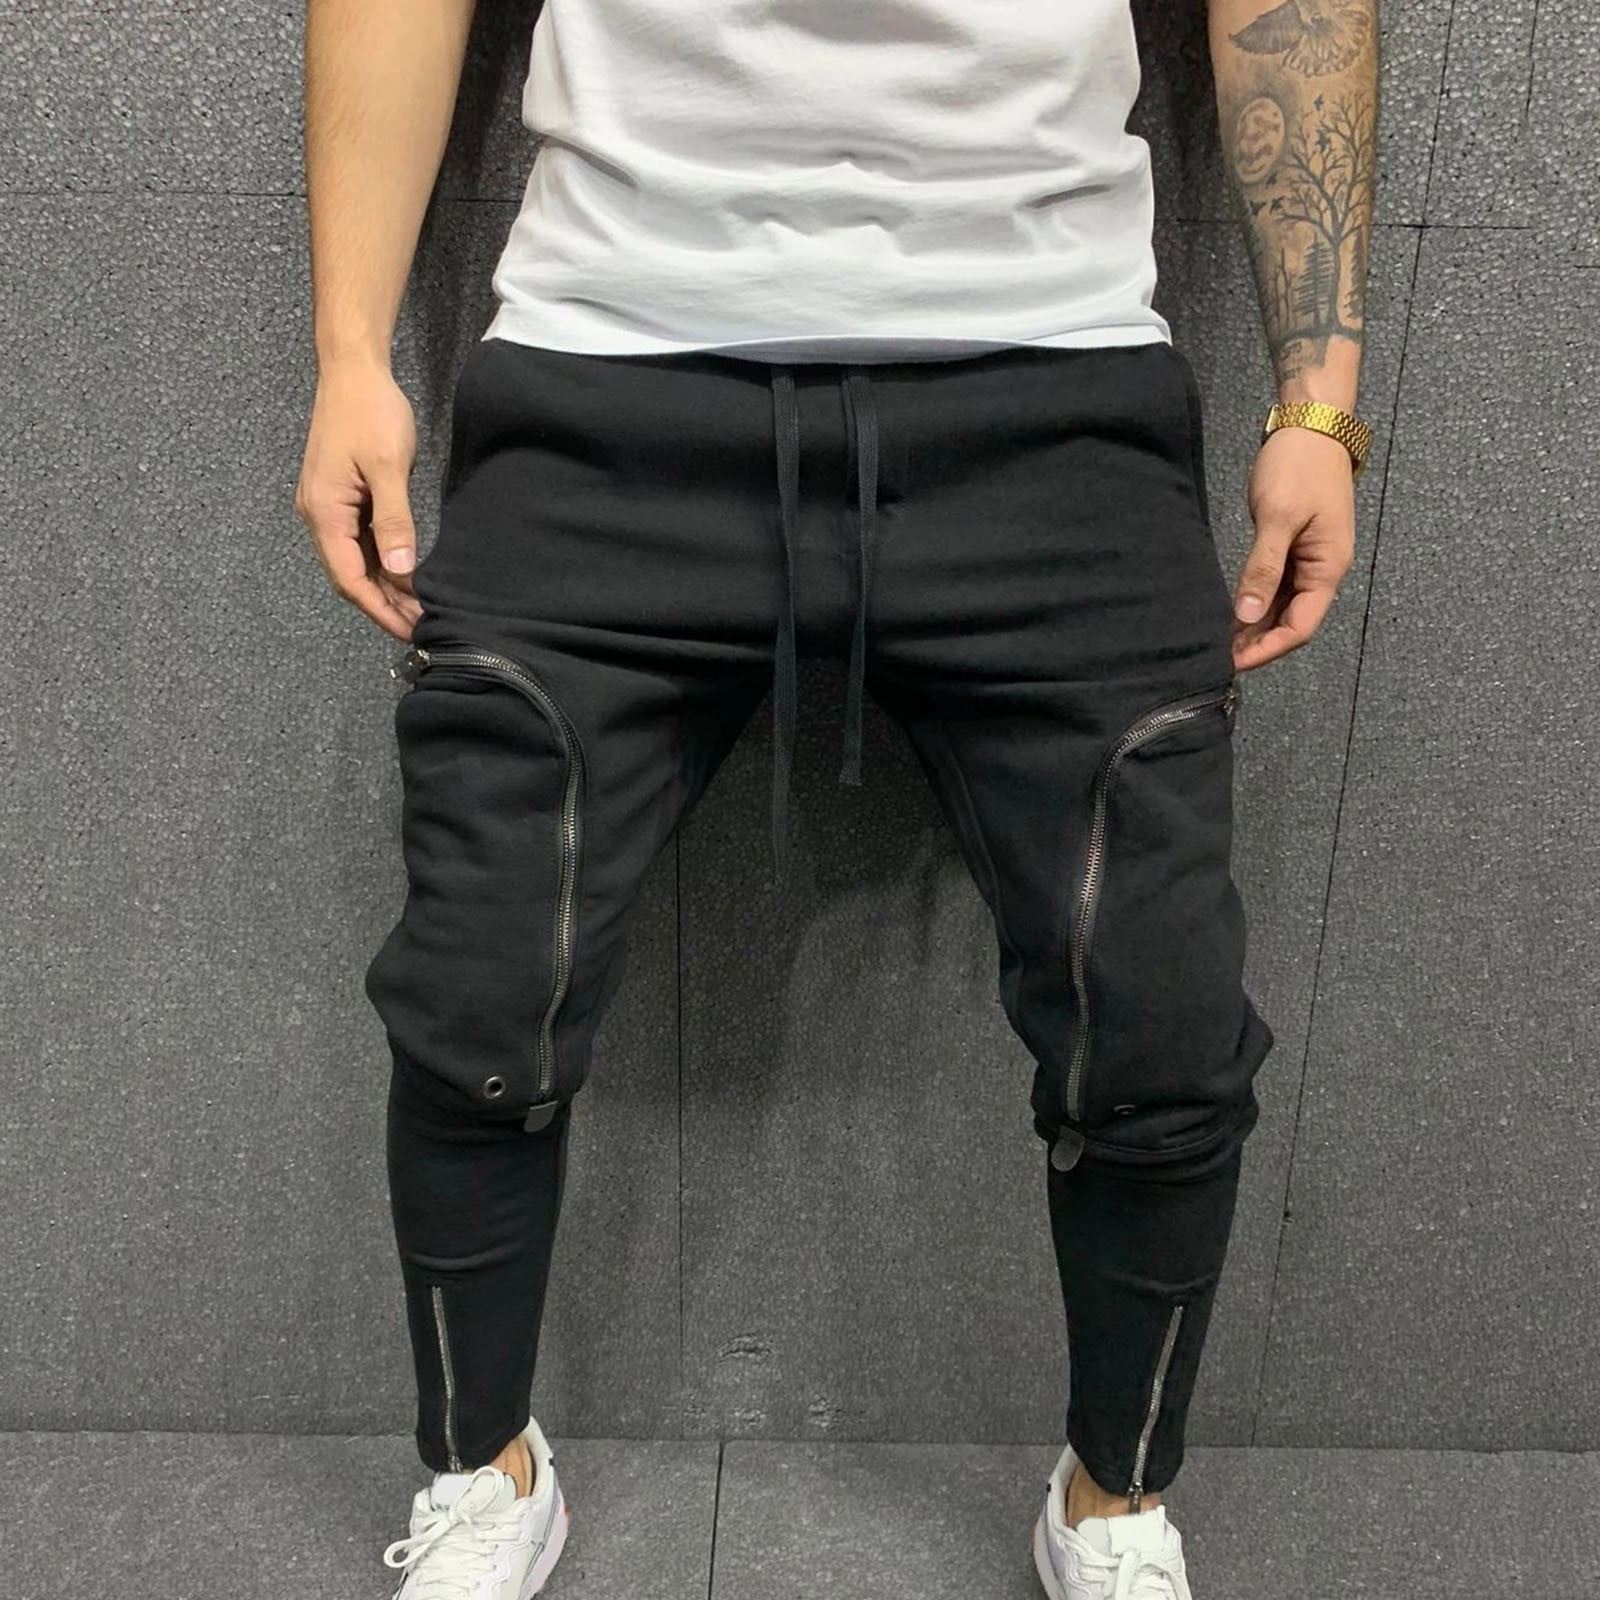 Mens Fashion Cargo Pants - Casual Cotton Tapered Stretch Twill Drawstring Athletic  Joggers Sweatpants with Pockets Plus Size Pants